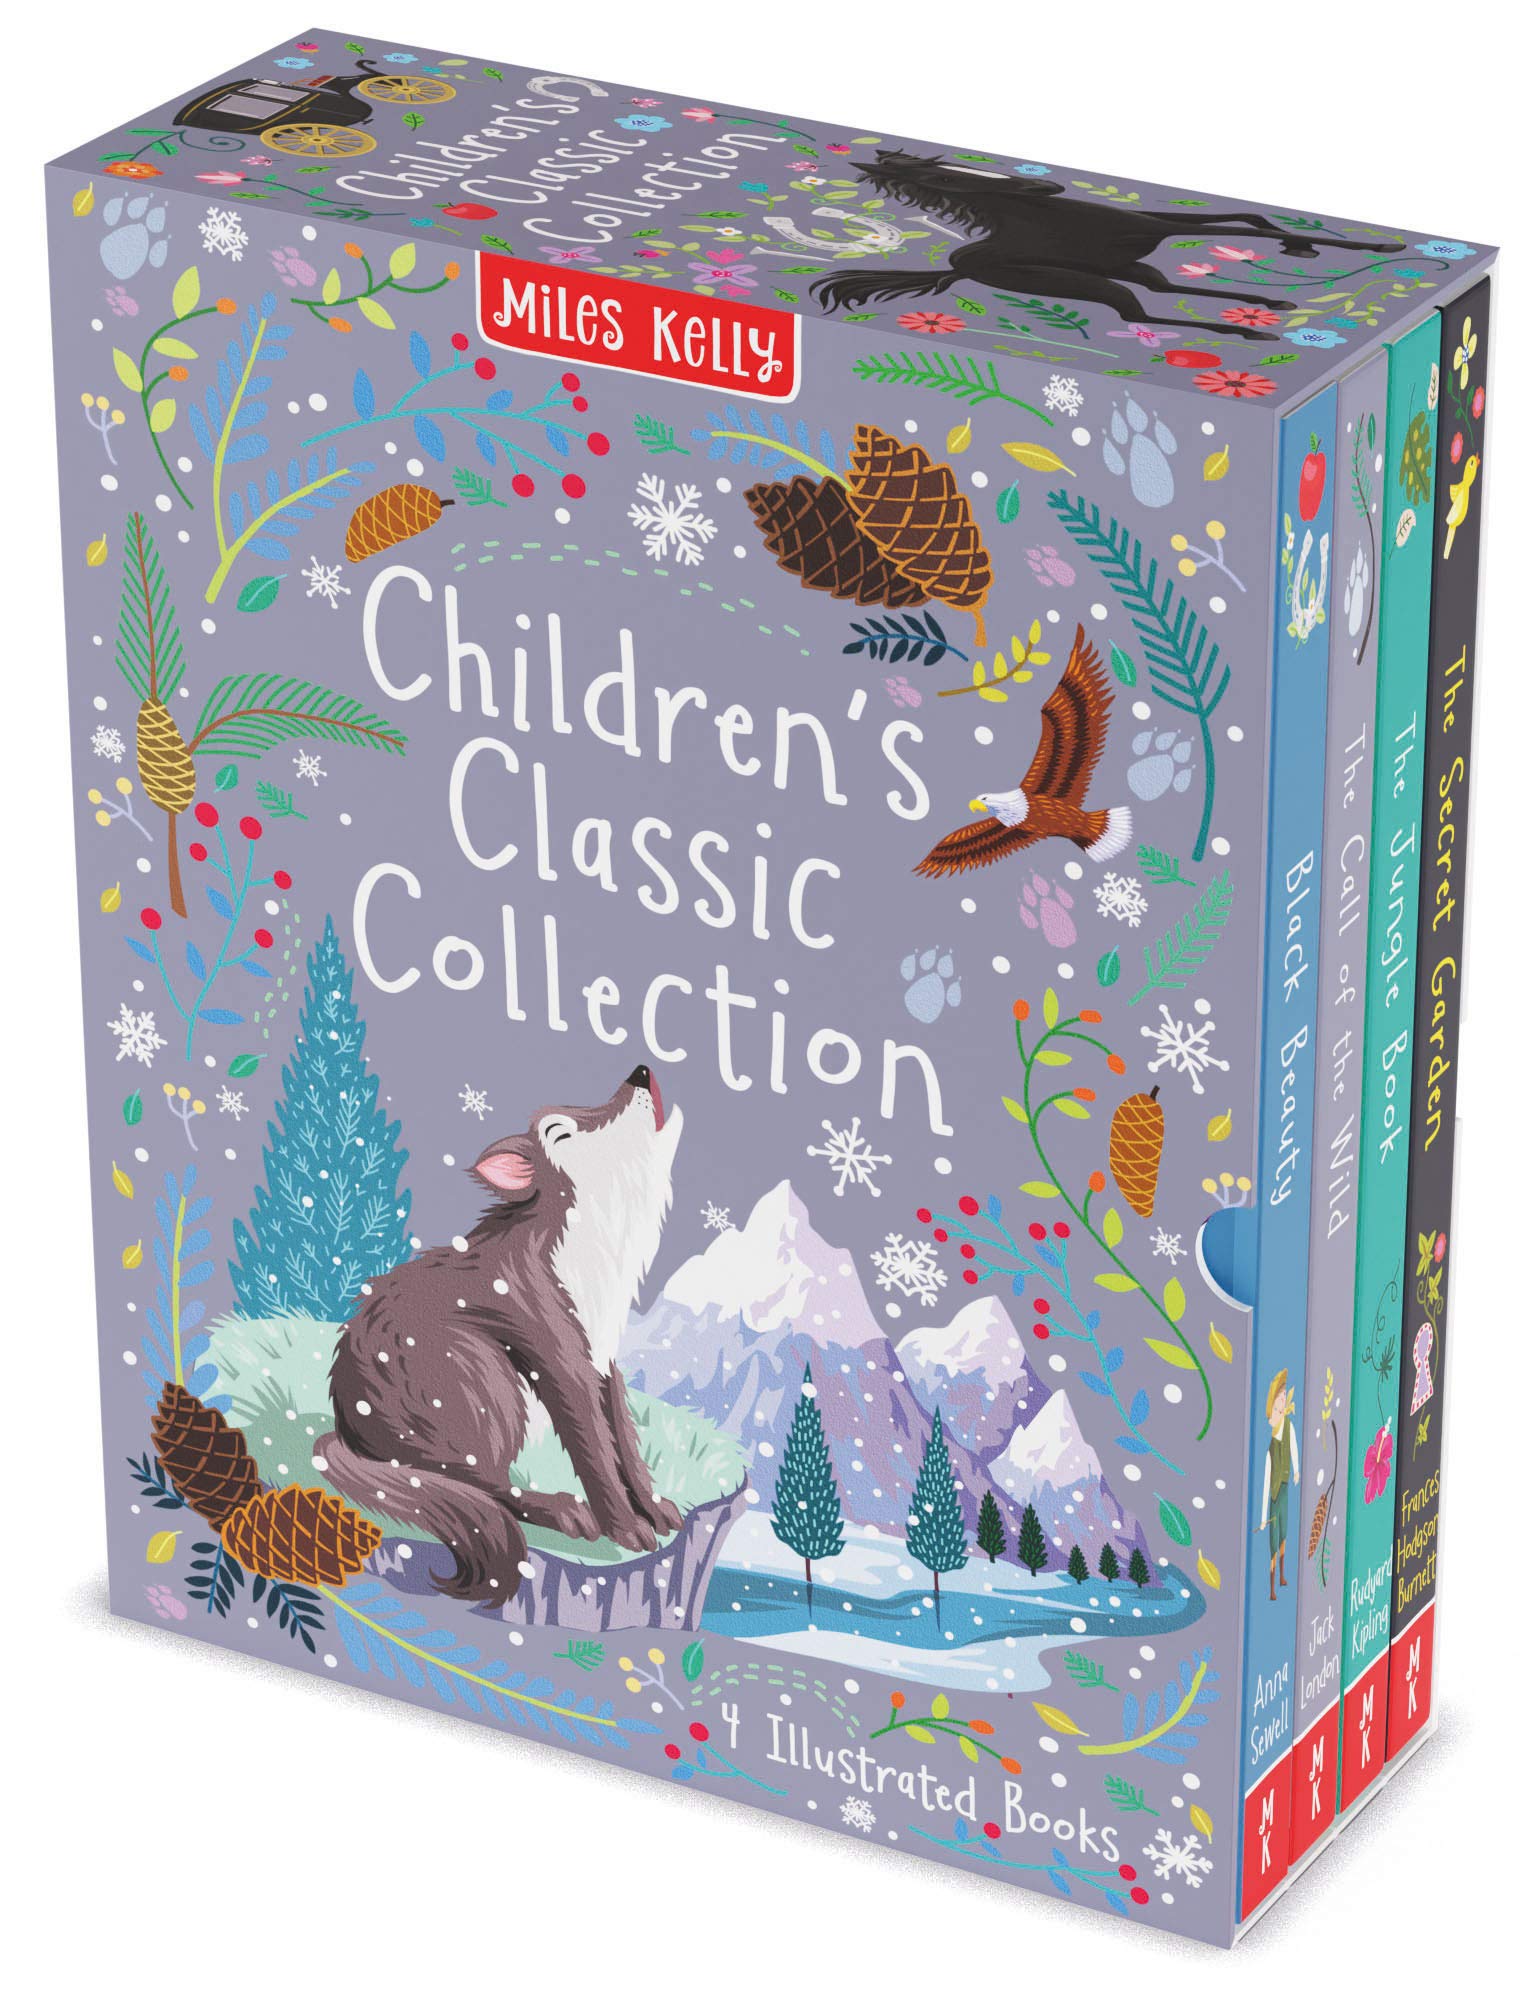 Childrens Classic Collection Slipcase